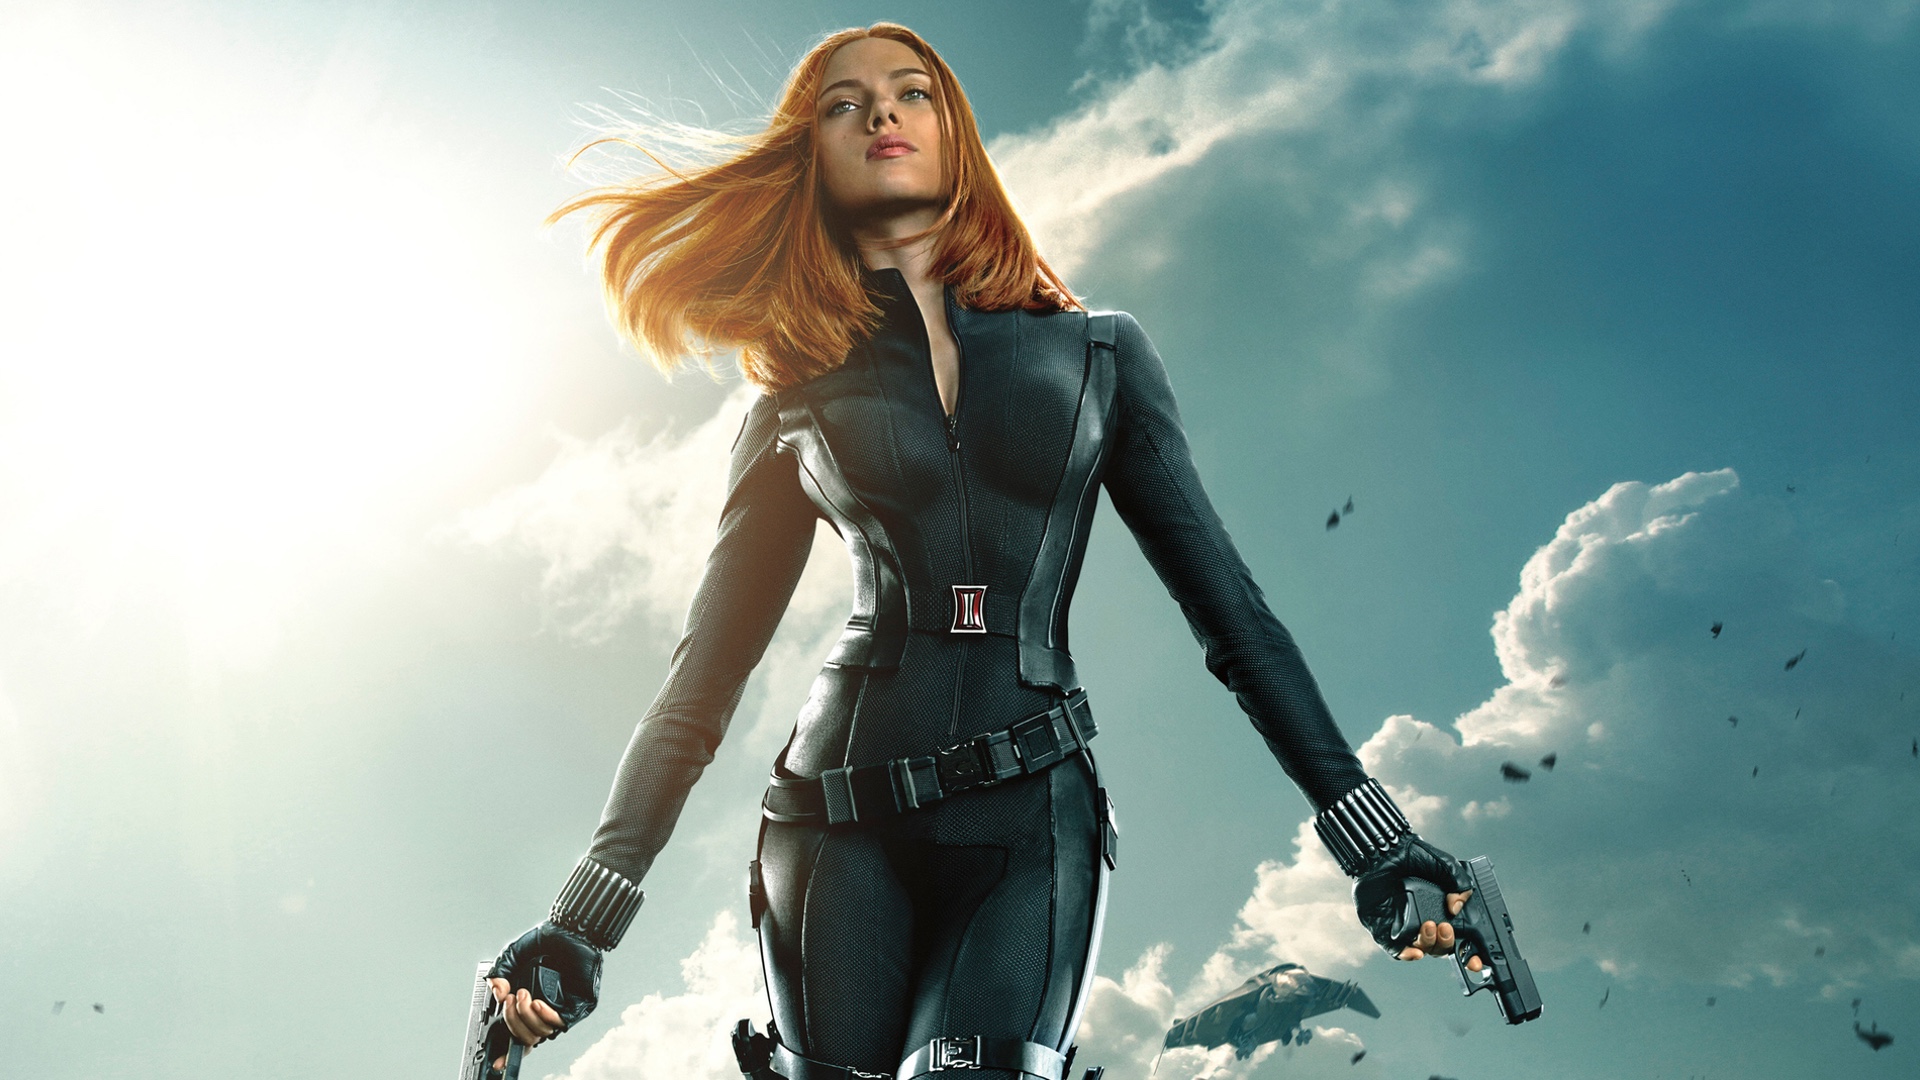 marvel-is-finally-moving-forward-with-a-black-widow-movie-social.jpg